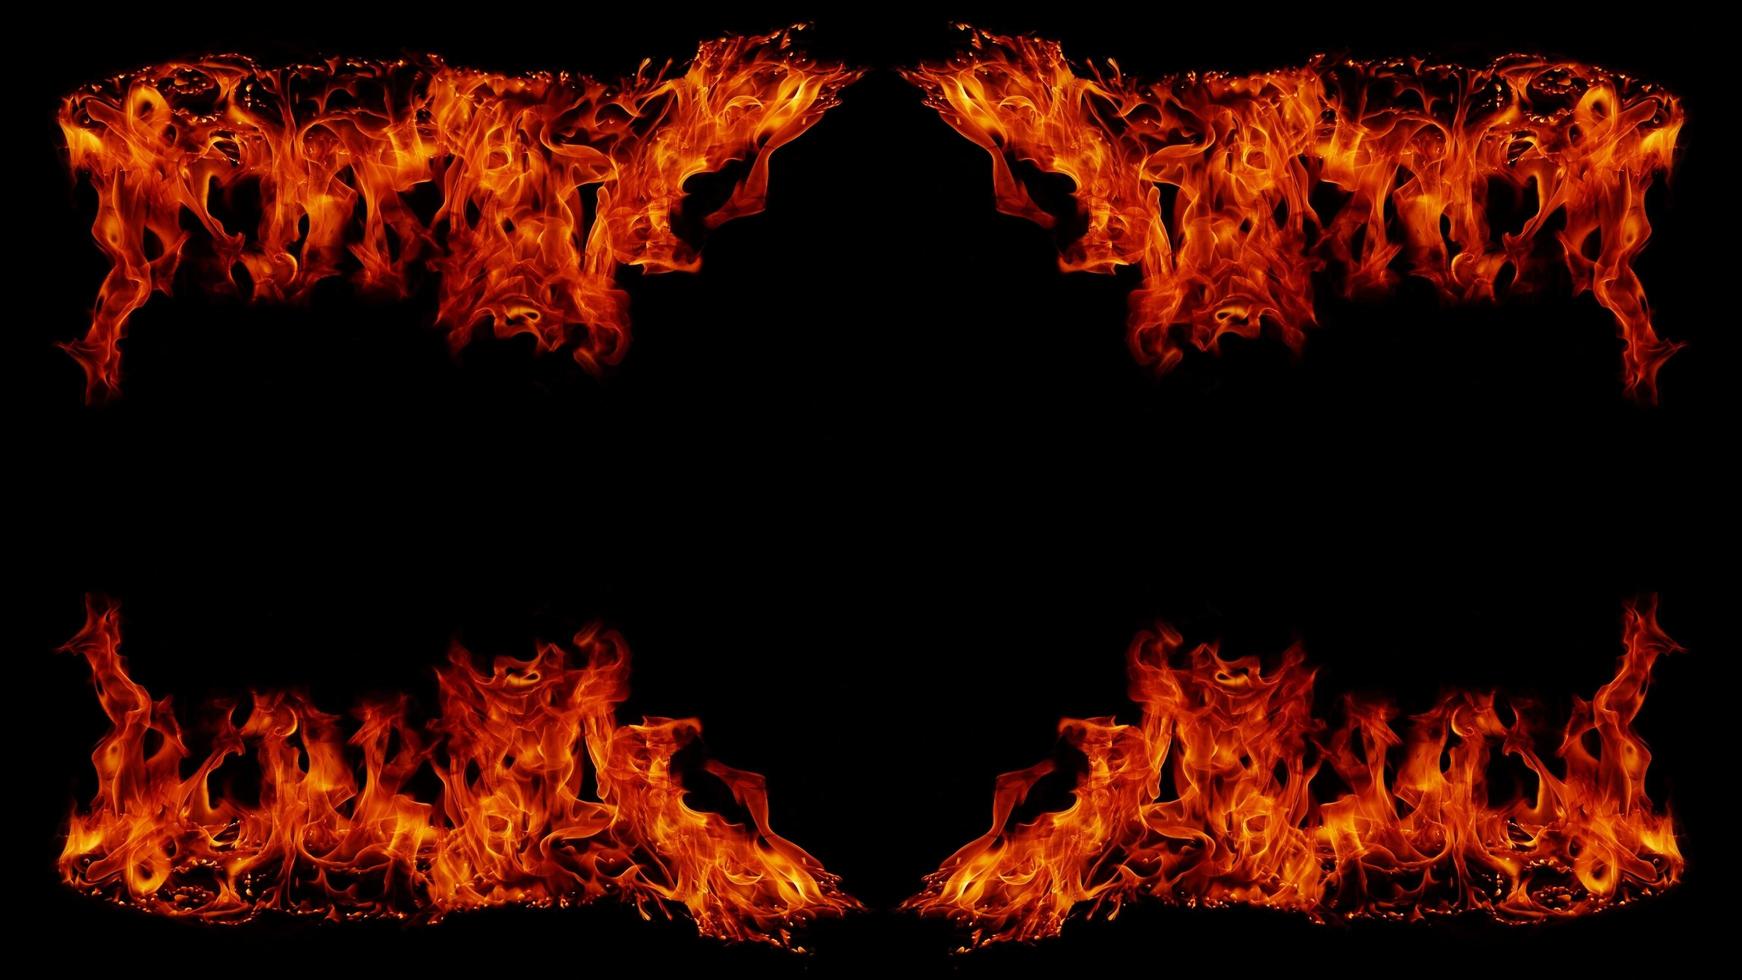 Dangerous hot inferno fire flames photo frame abstract fire squares on black background for design.